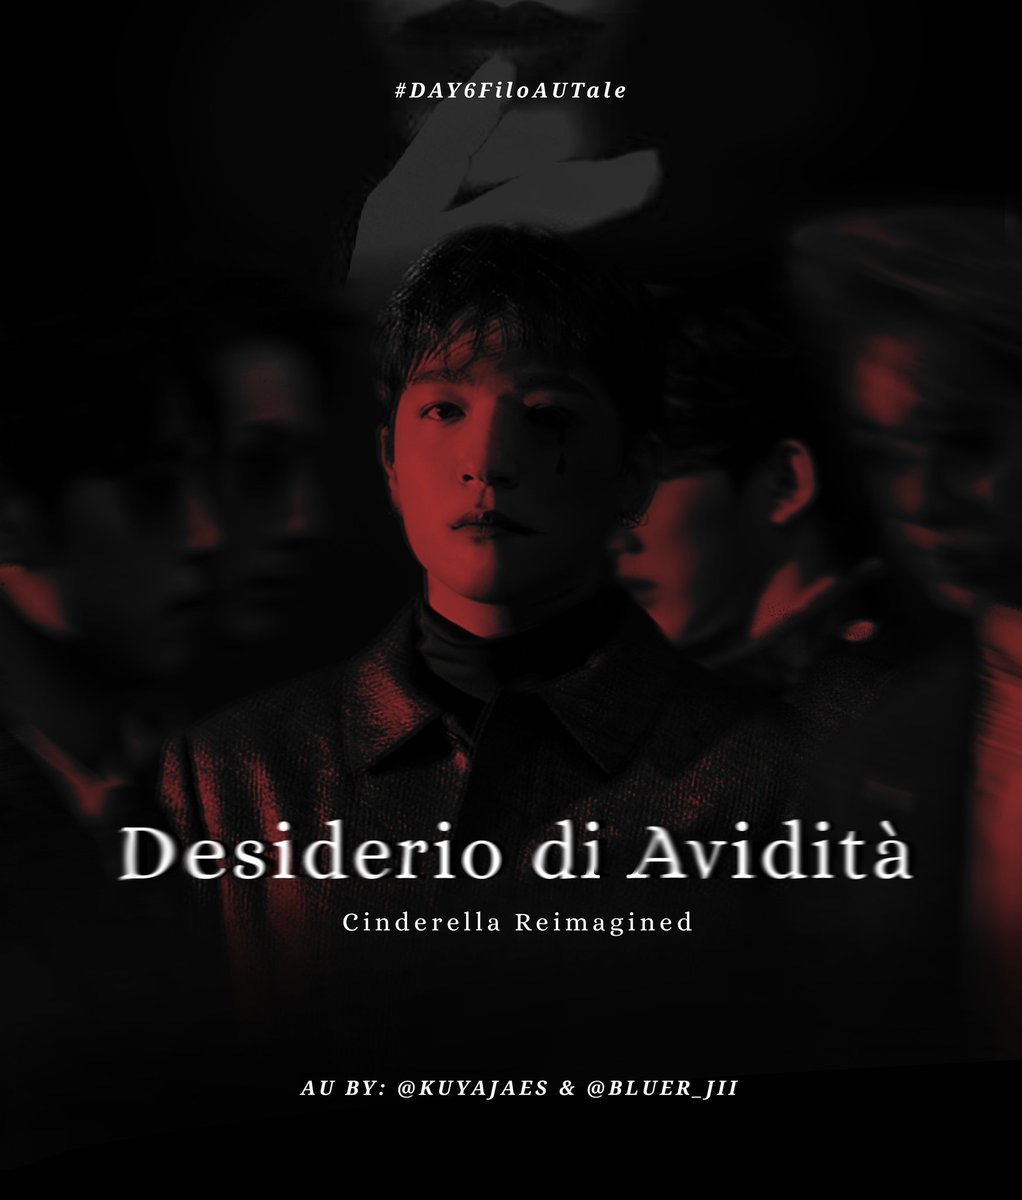 《Desiderio di Avidità: CINDERELLA REIMAGINED》"You have needs - satisfy them. Don't hesitate to satisfy your needs; indeed, expand your needs & demand more." - Fyodor Dostoyevsky[  #DAY6FiloAUTale •  @day6autale ]♡ with:  @kuyaJAEs ♡